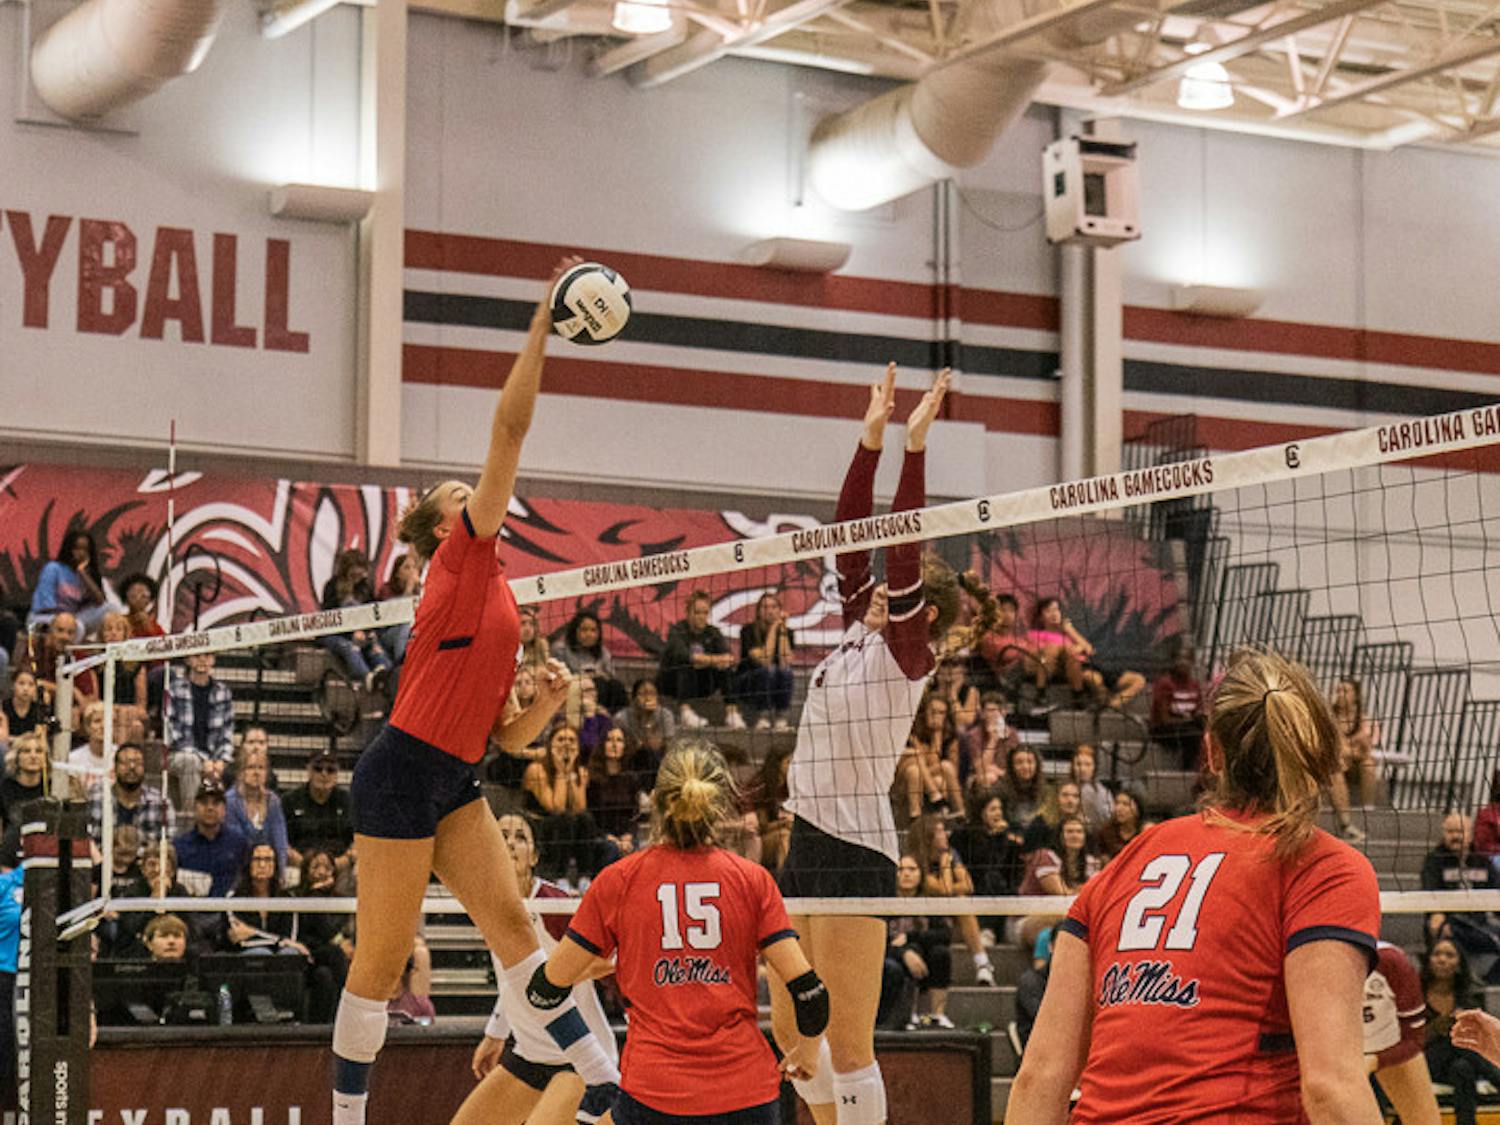 Ole Miss junior middle blocker Payton Brgoch spikes the ball over the net during the matchup against South Carolina on Nov. 5, 2022. The Rebels scored 64 kills, while the Gamecocks scored 59.&nbsp;